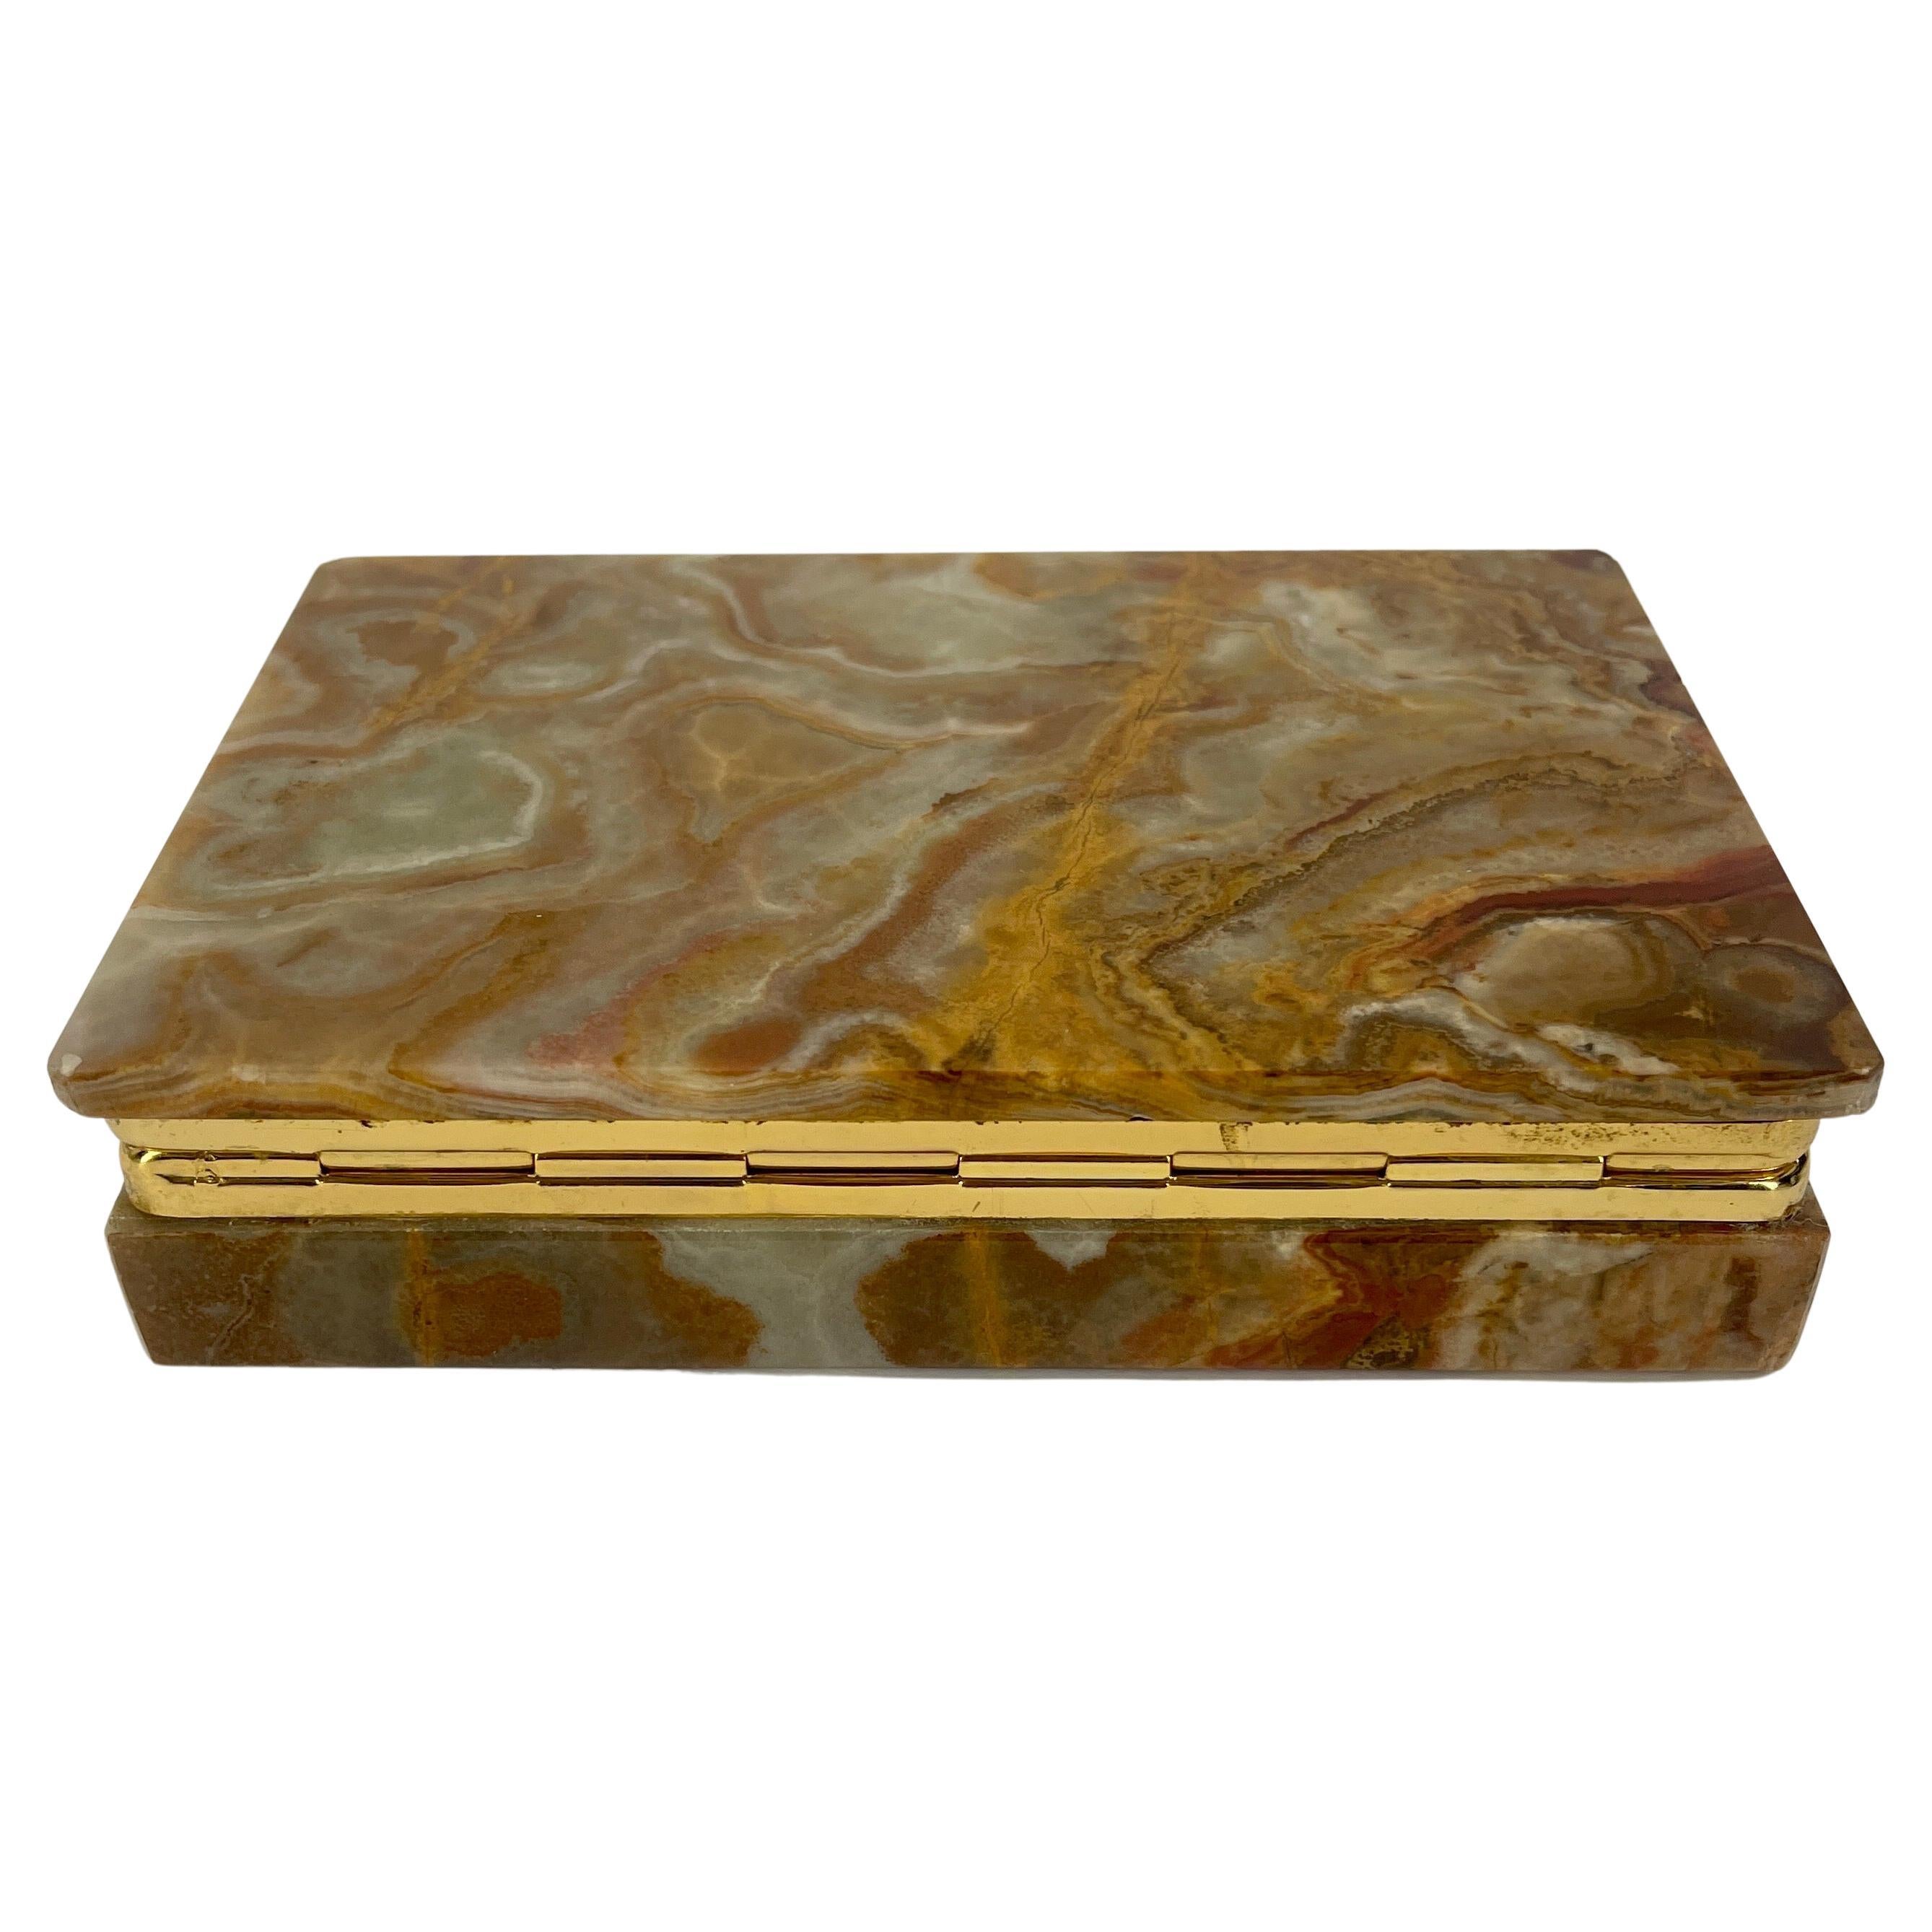 Vintage Hollywood Regency Agate Gilt Brass Jewelry Box Circa 1960's, Italy

Brass rectangular jewelry box from Italy. Wonderful piece standing alone on a vanity table, dressing area  or perfect addition to any home displayed on a coffee table. This